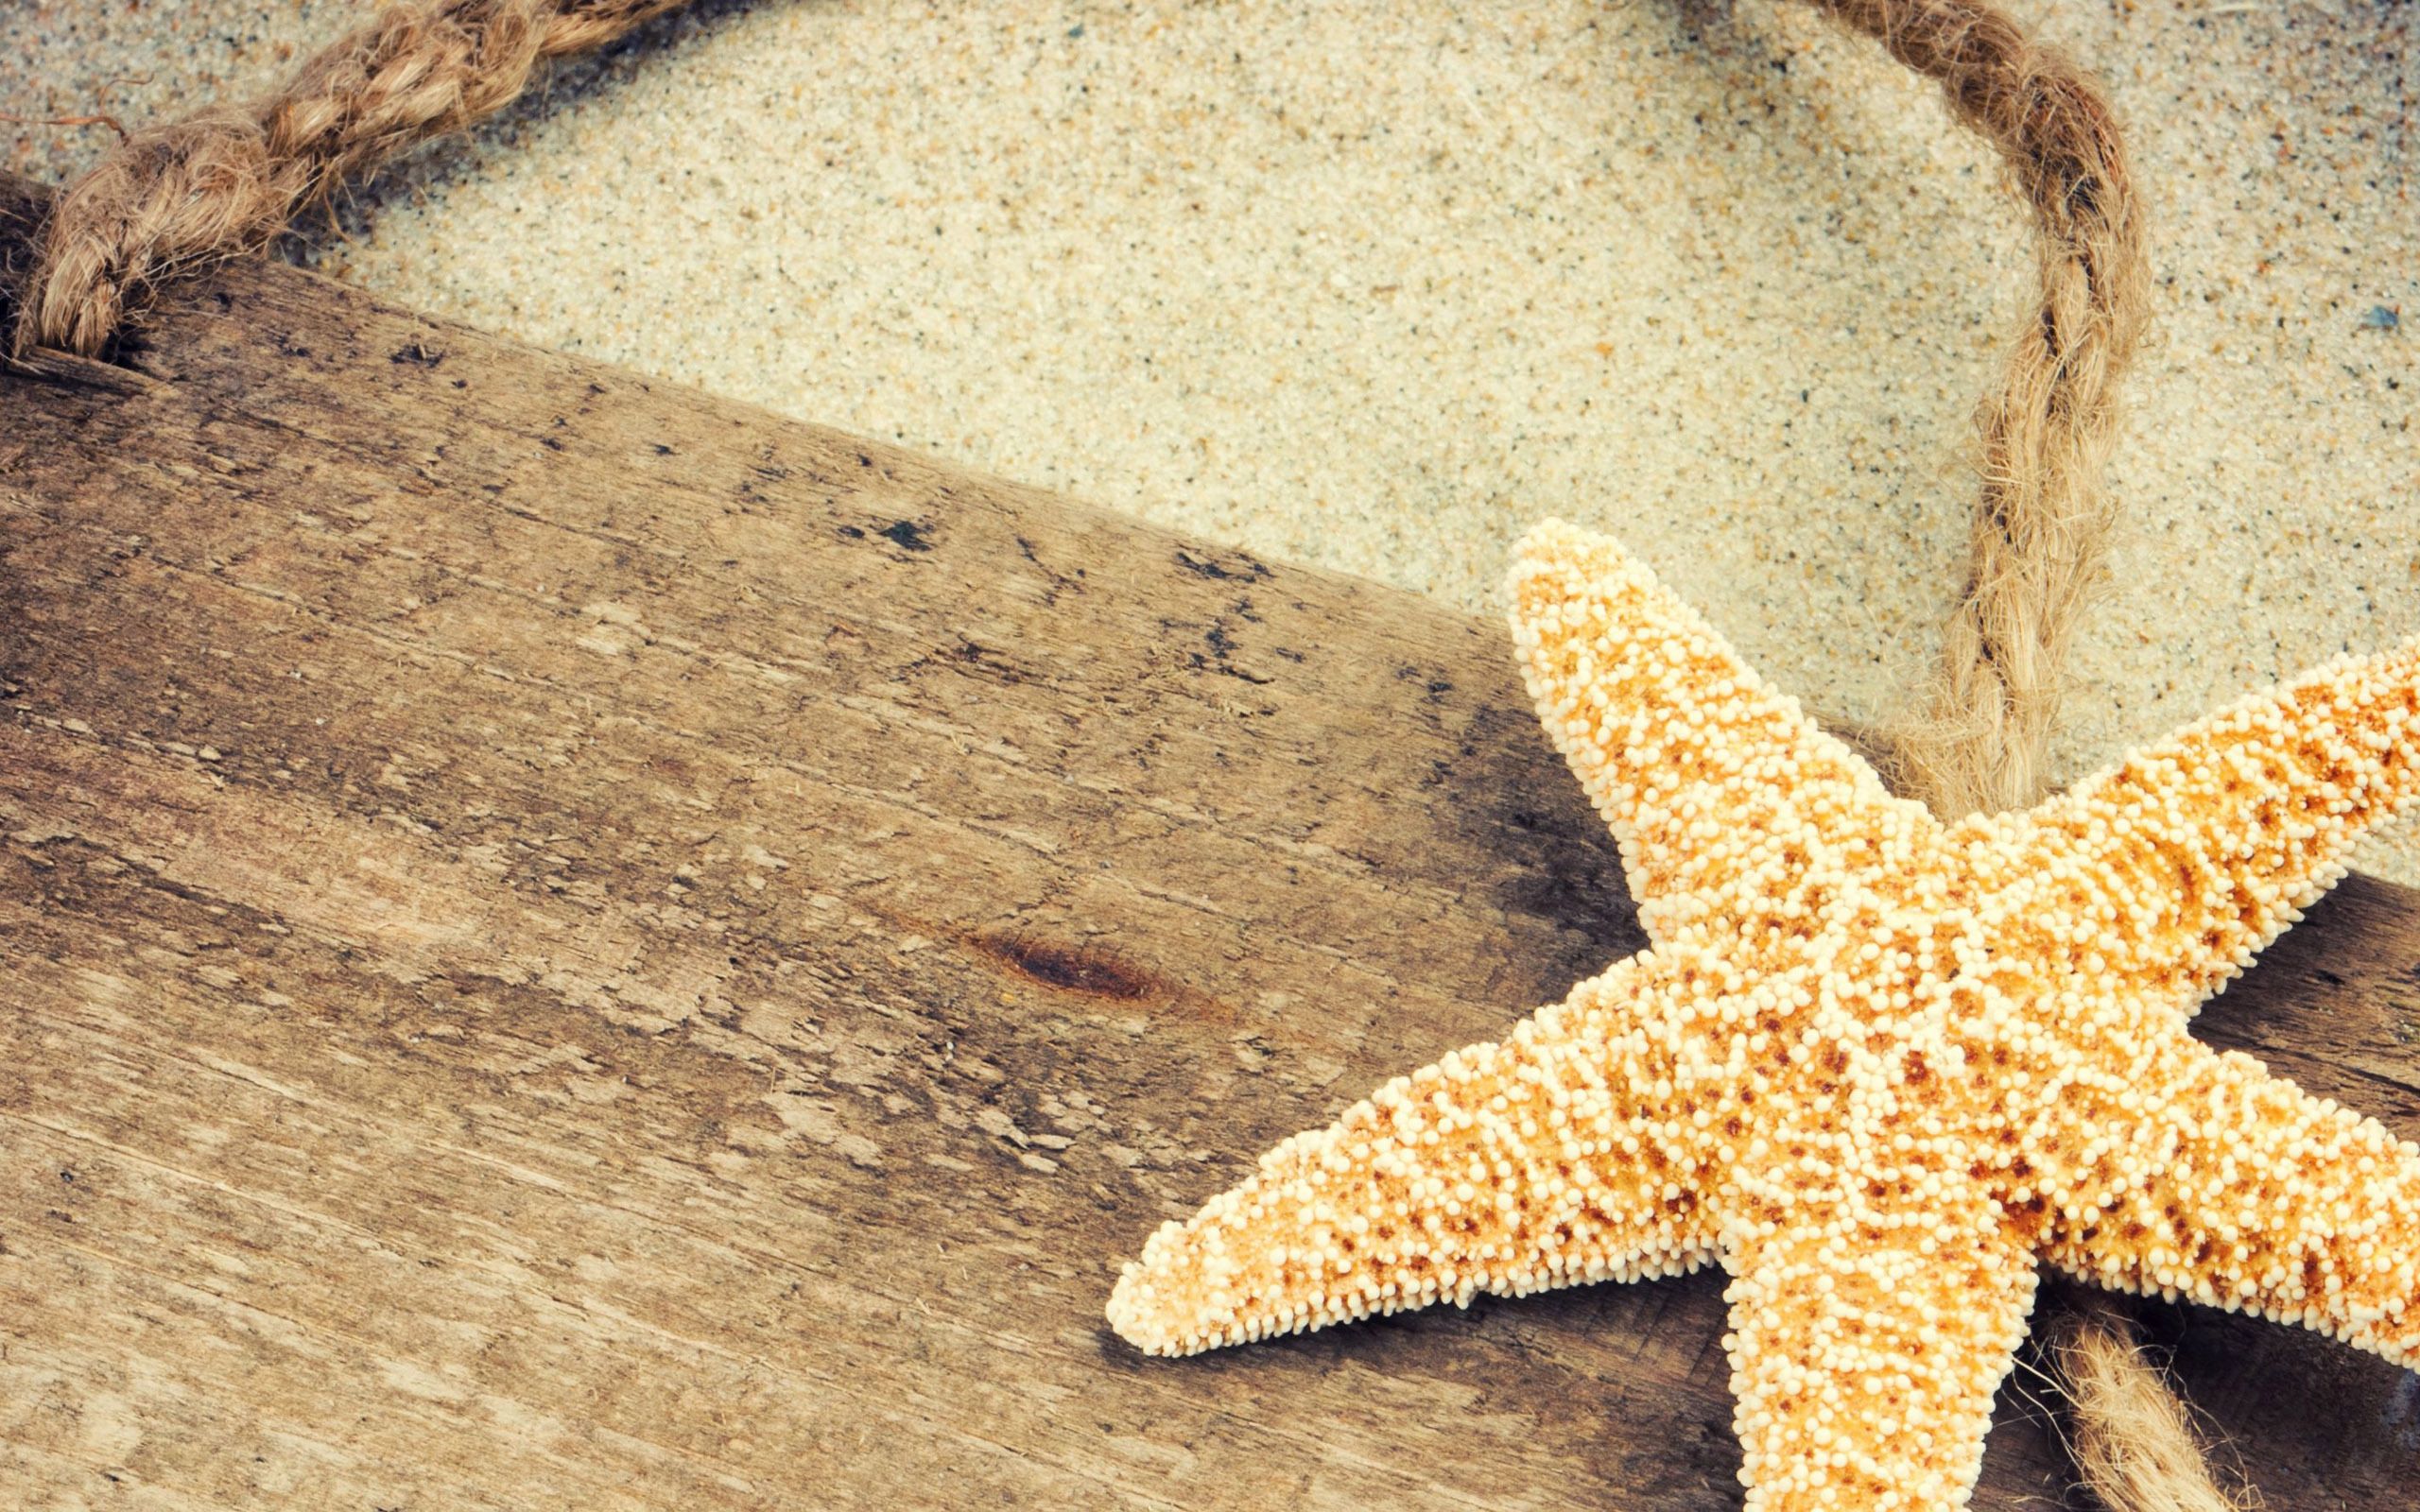 A starfish on a wooden board with sand - Starfish